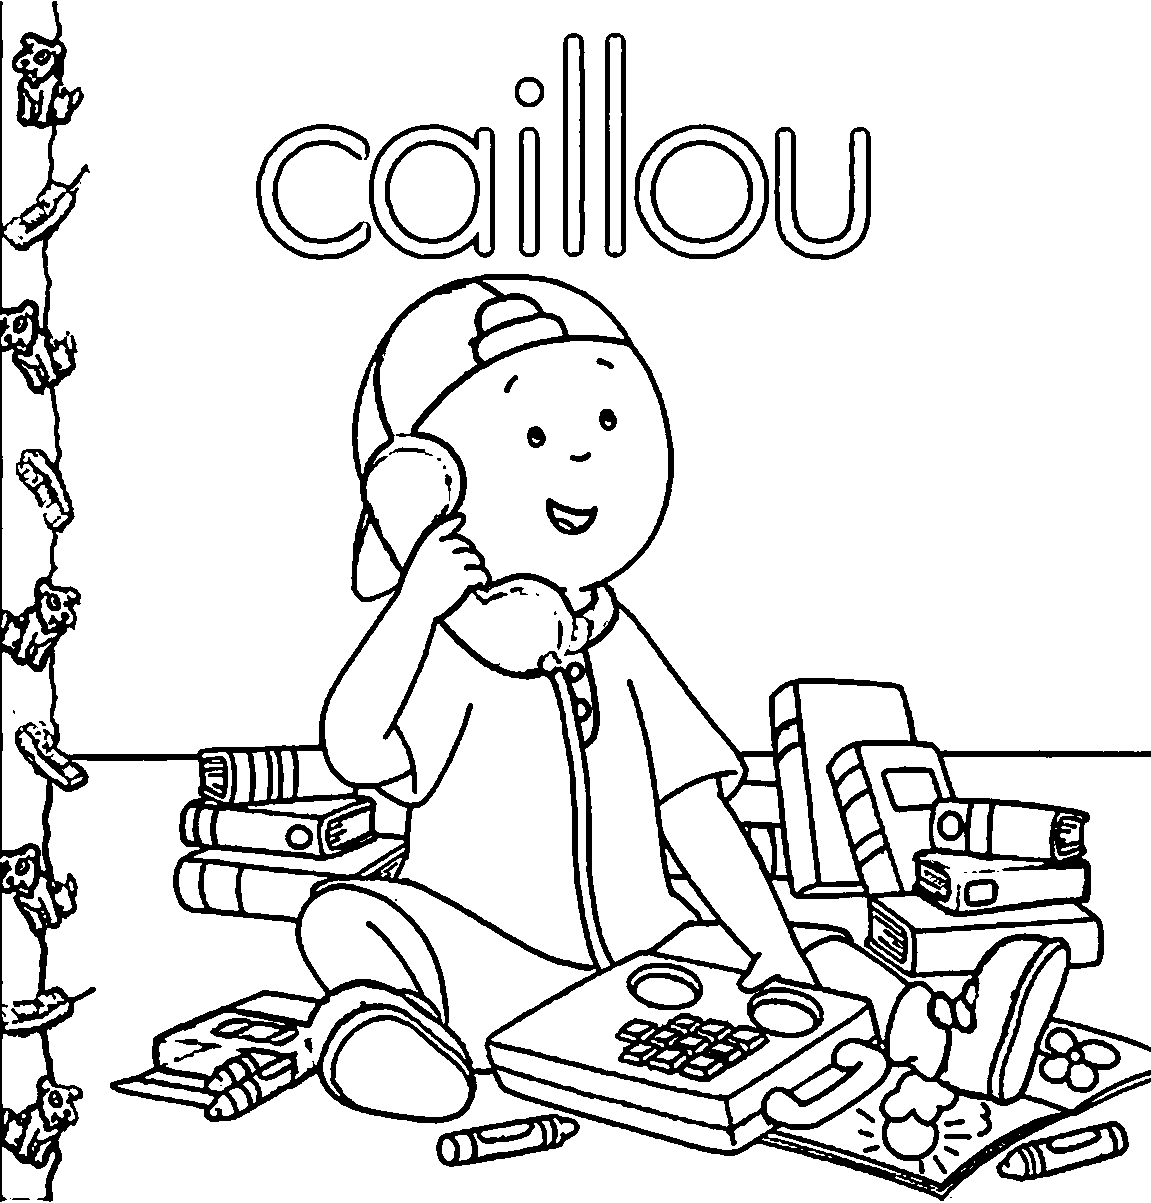 printable caillou coloring pages Coloring4free